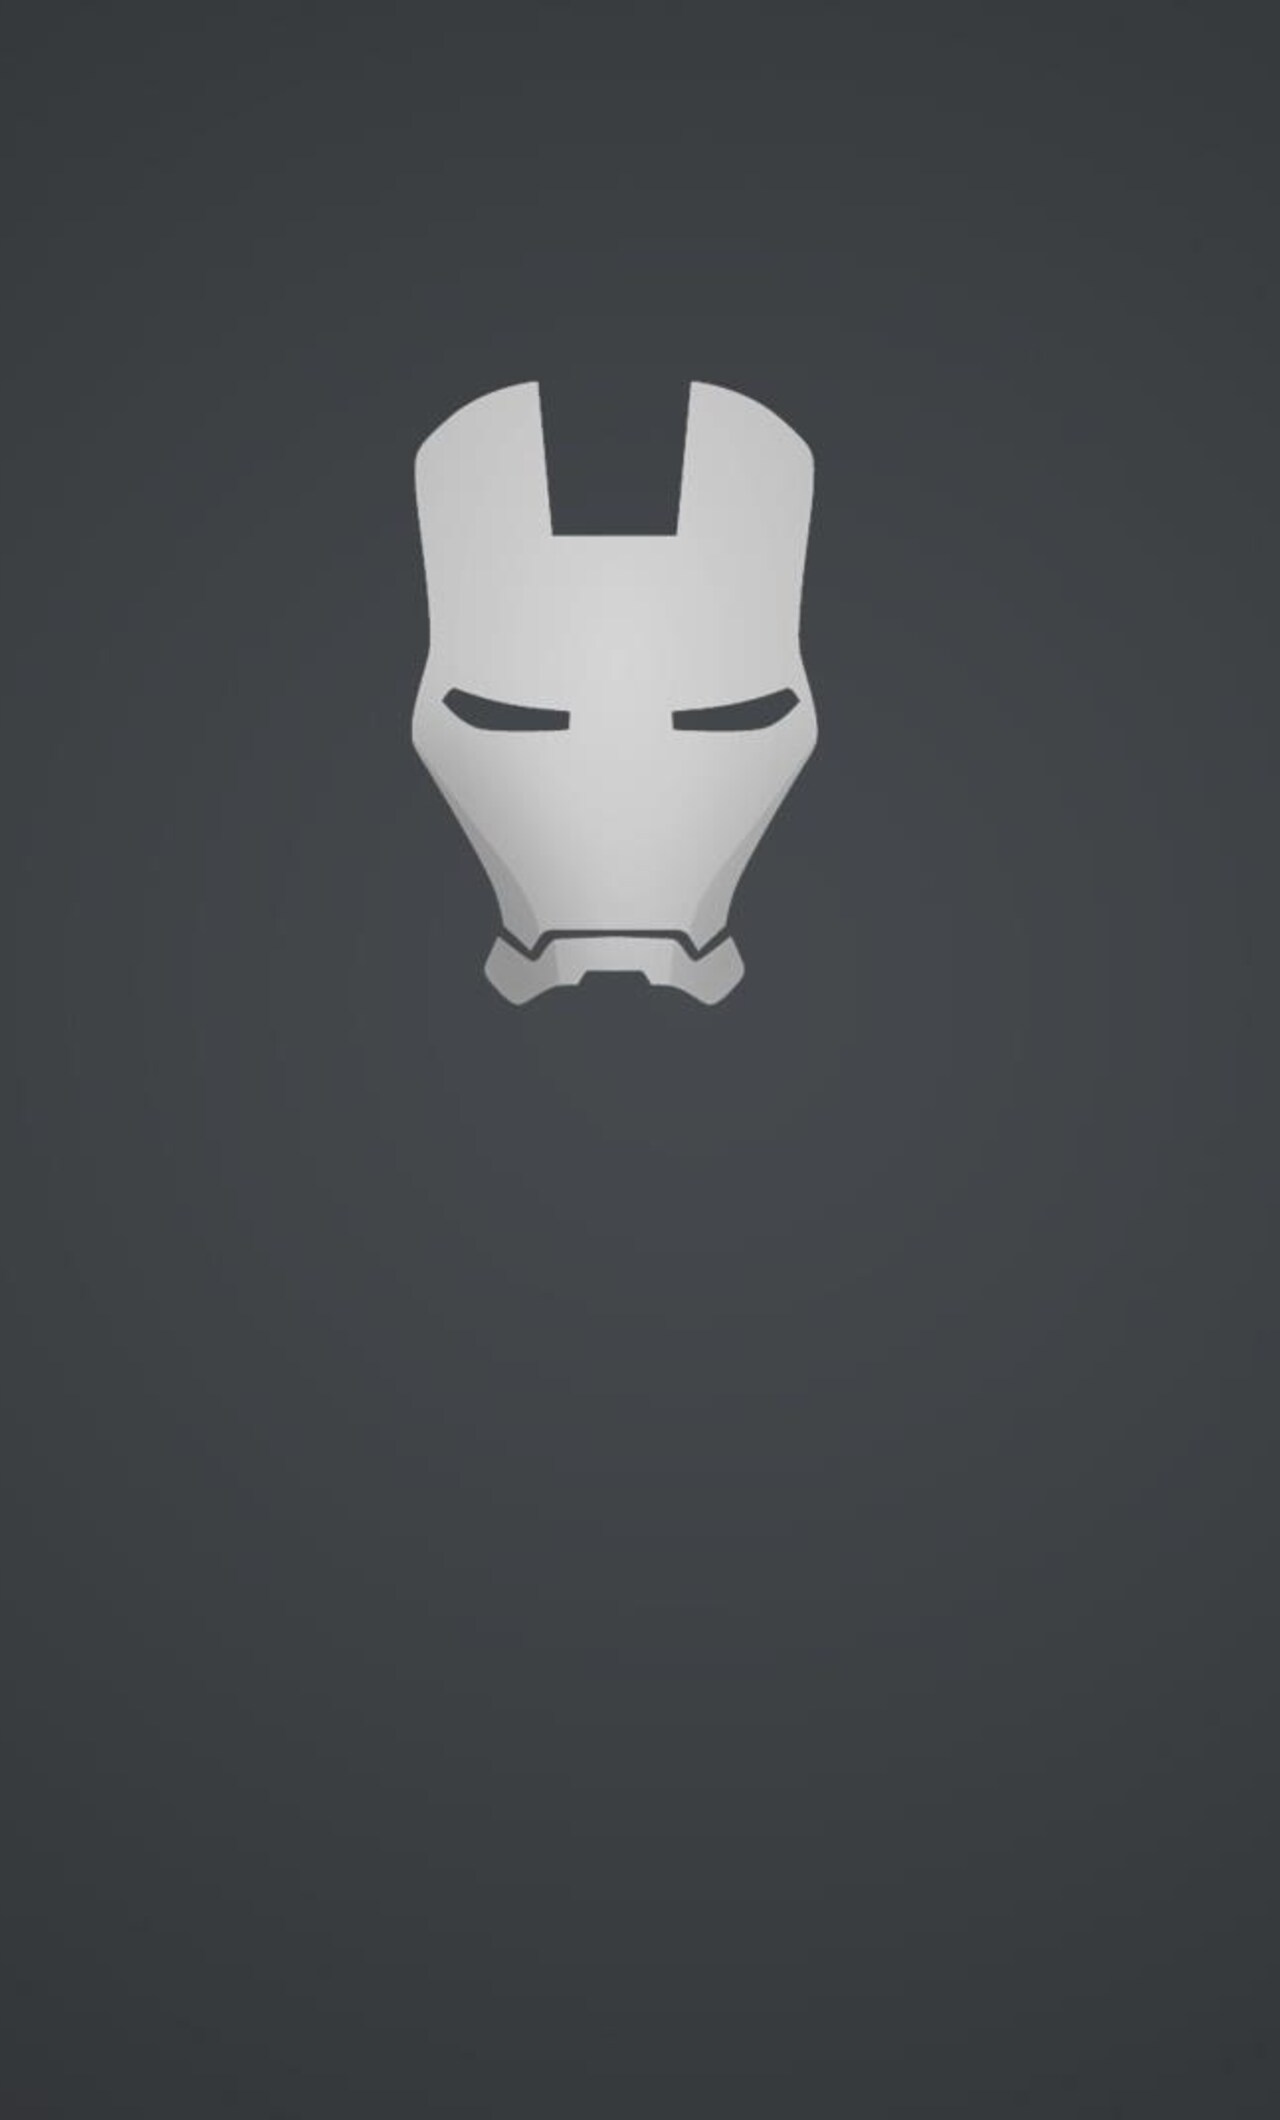 1280x2120 Iron Man Simple 3 Iphone 6 Hd 4k Wallpapers Images